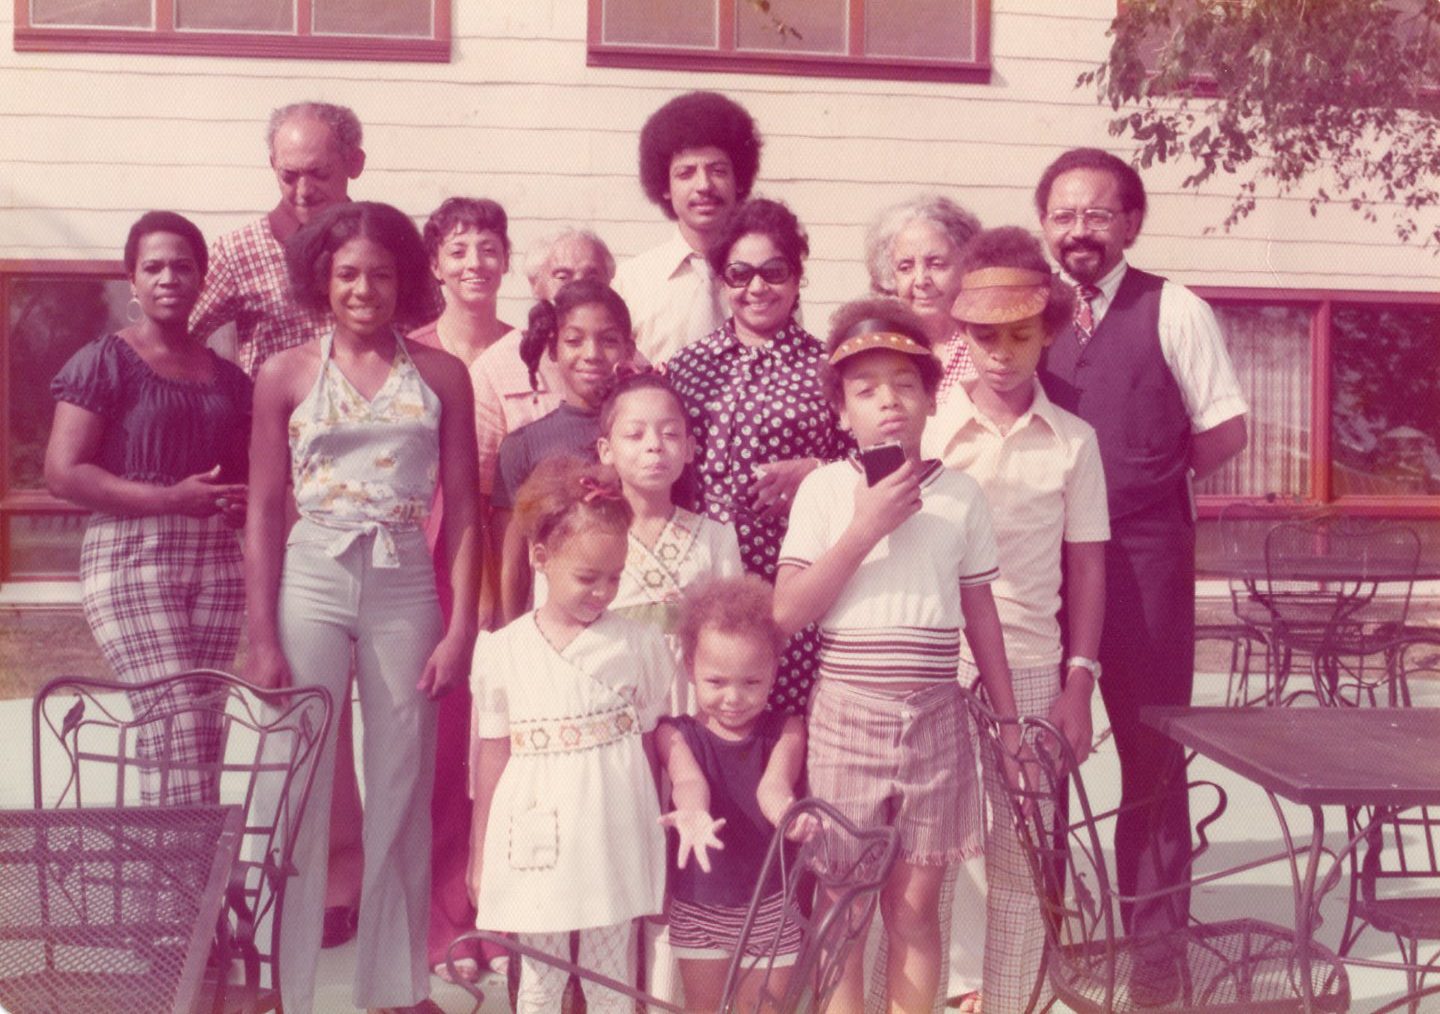 Three generations of the Goodwin family at their country estate, Willow Lake Farm, in the 1970s (Photo Credit: Jeanne Osby Goodwin Arradondo Family Collection)